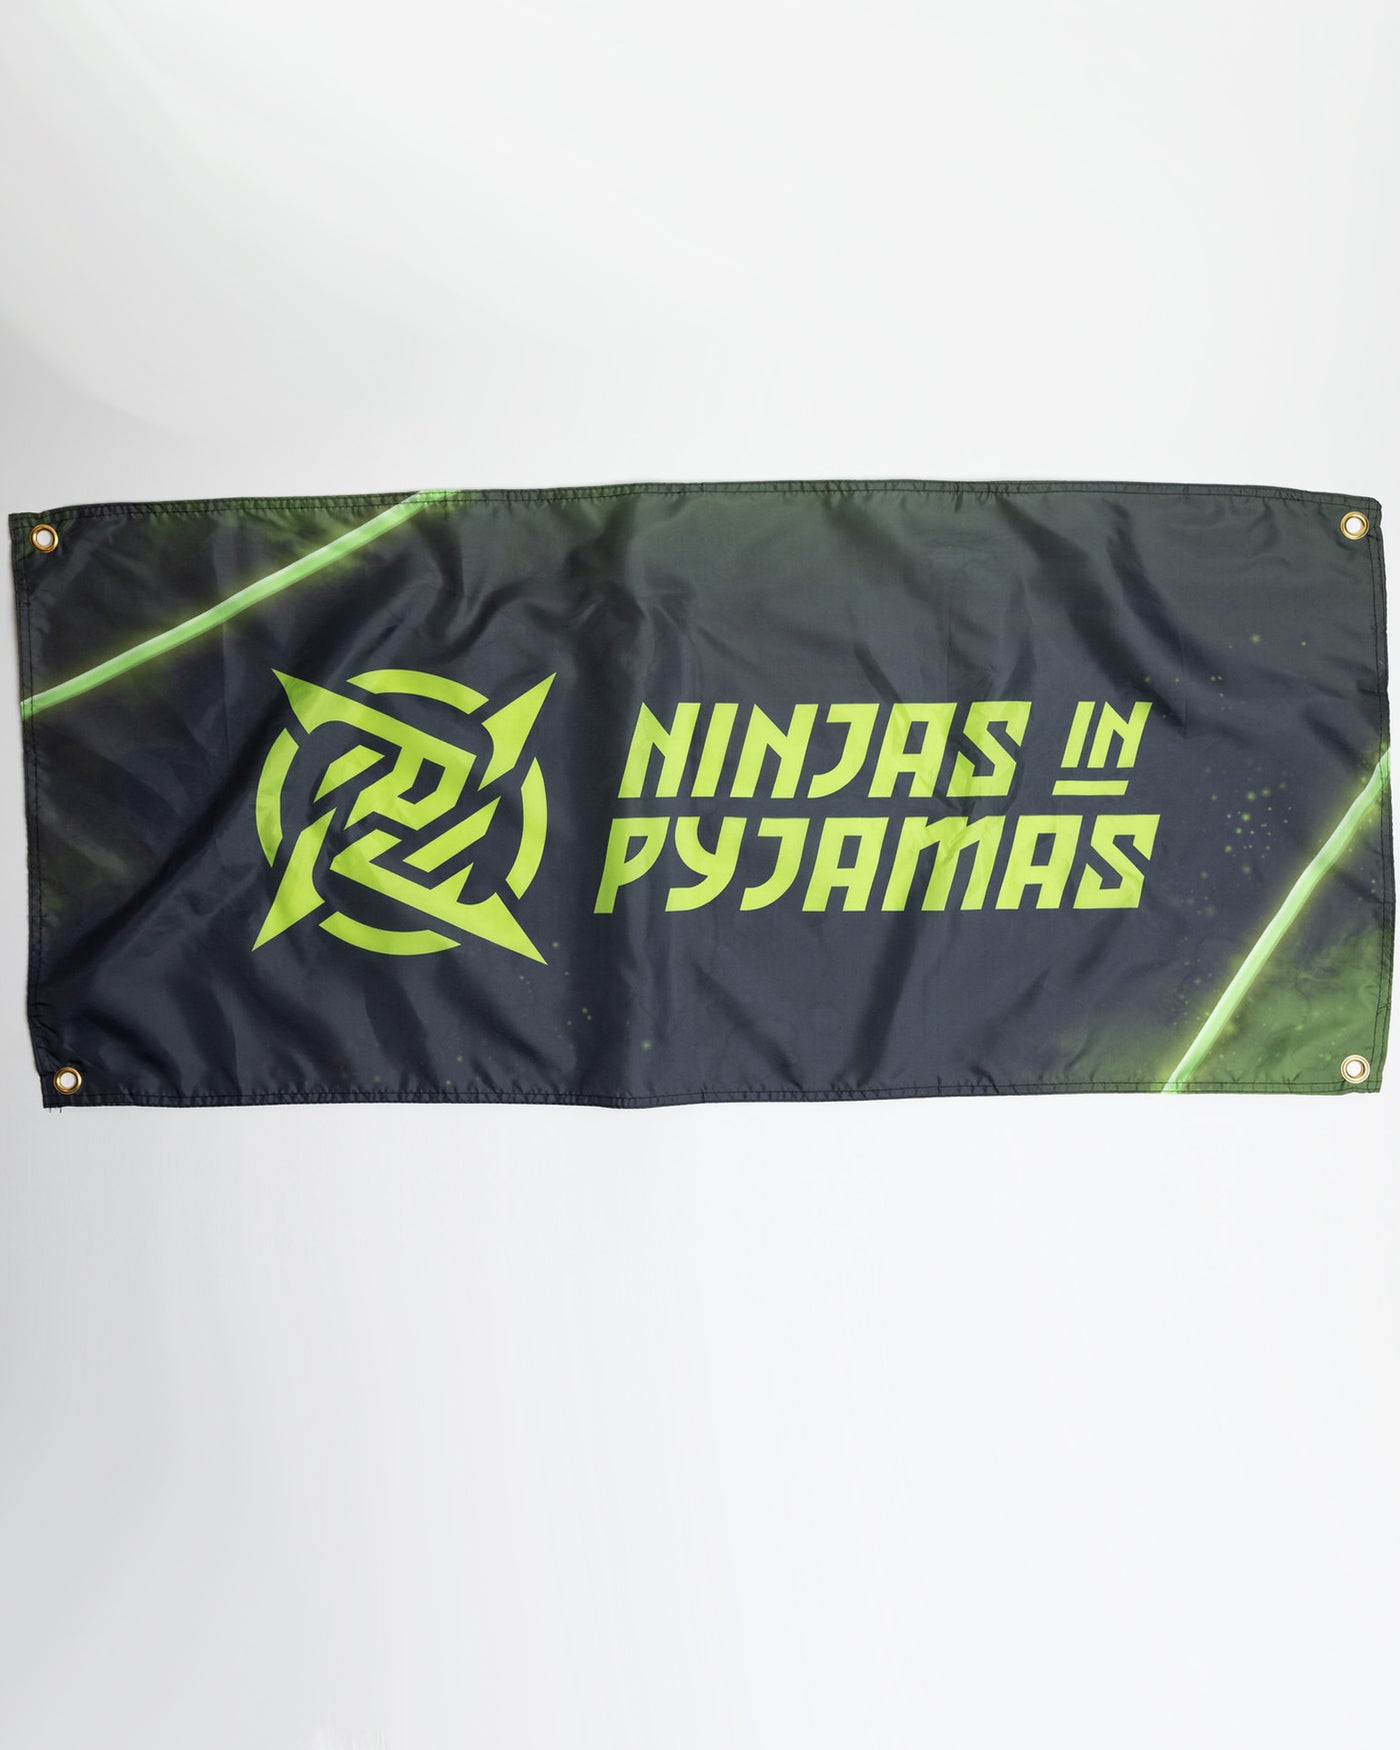  A high-quality flag featuring the iconic Ninjas in Pyjamas logo in bold colors on a black background. This premium flag is made of durable material and is perfect for proudly displaying your support for NIP.